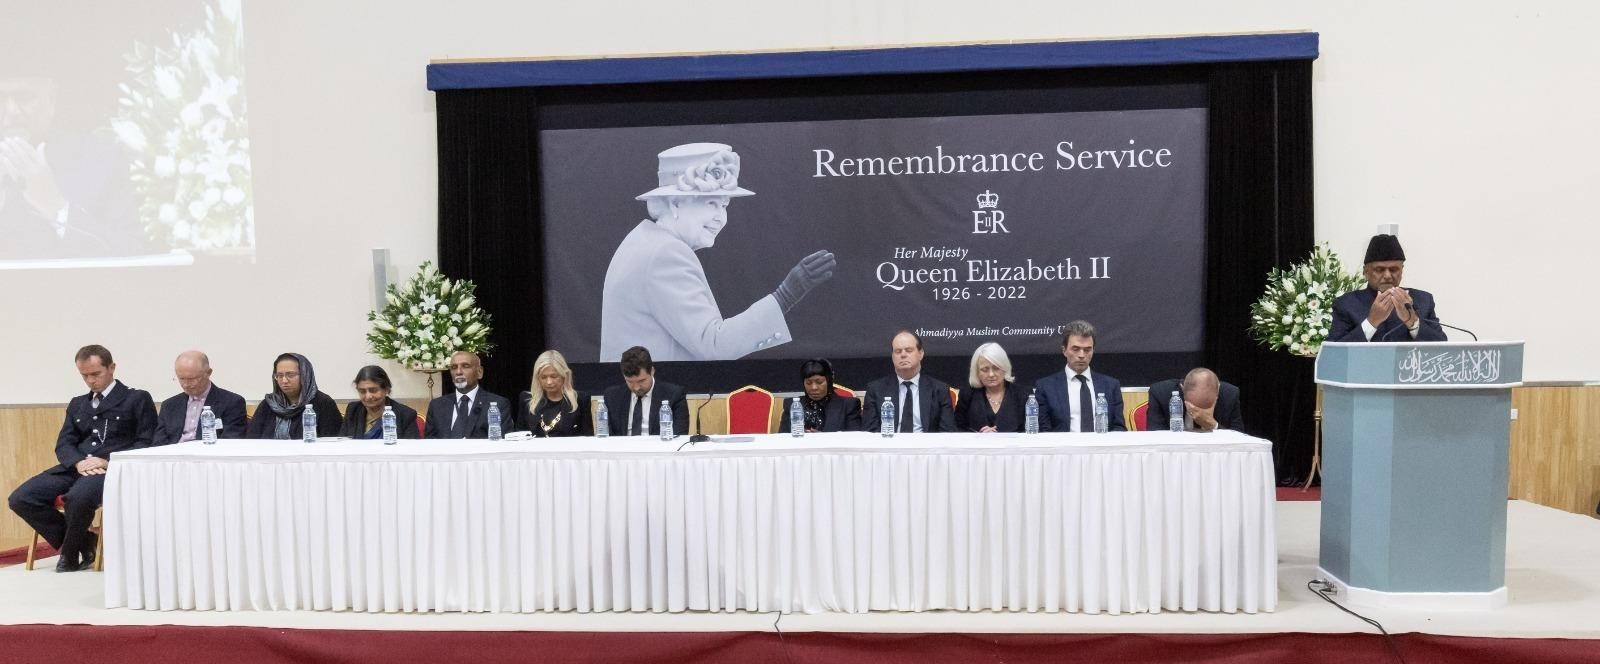 Remembrance event for HM The Queen held at Baitul Futuh Mosque in Morden